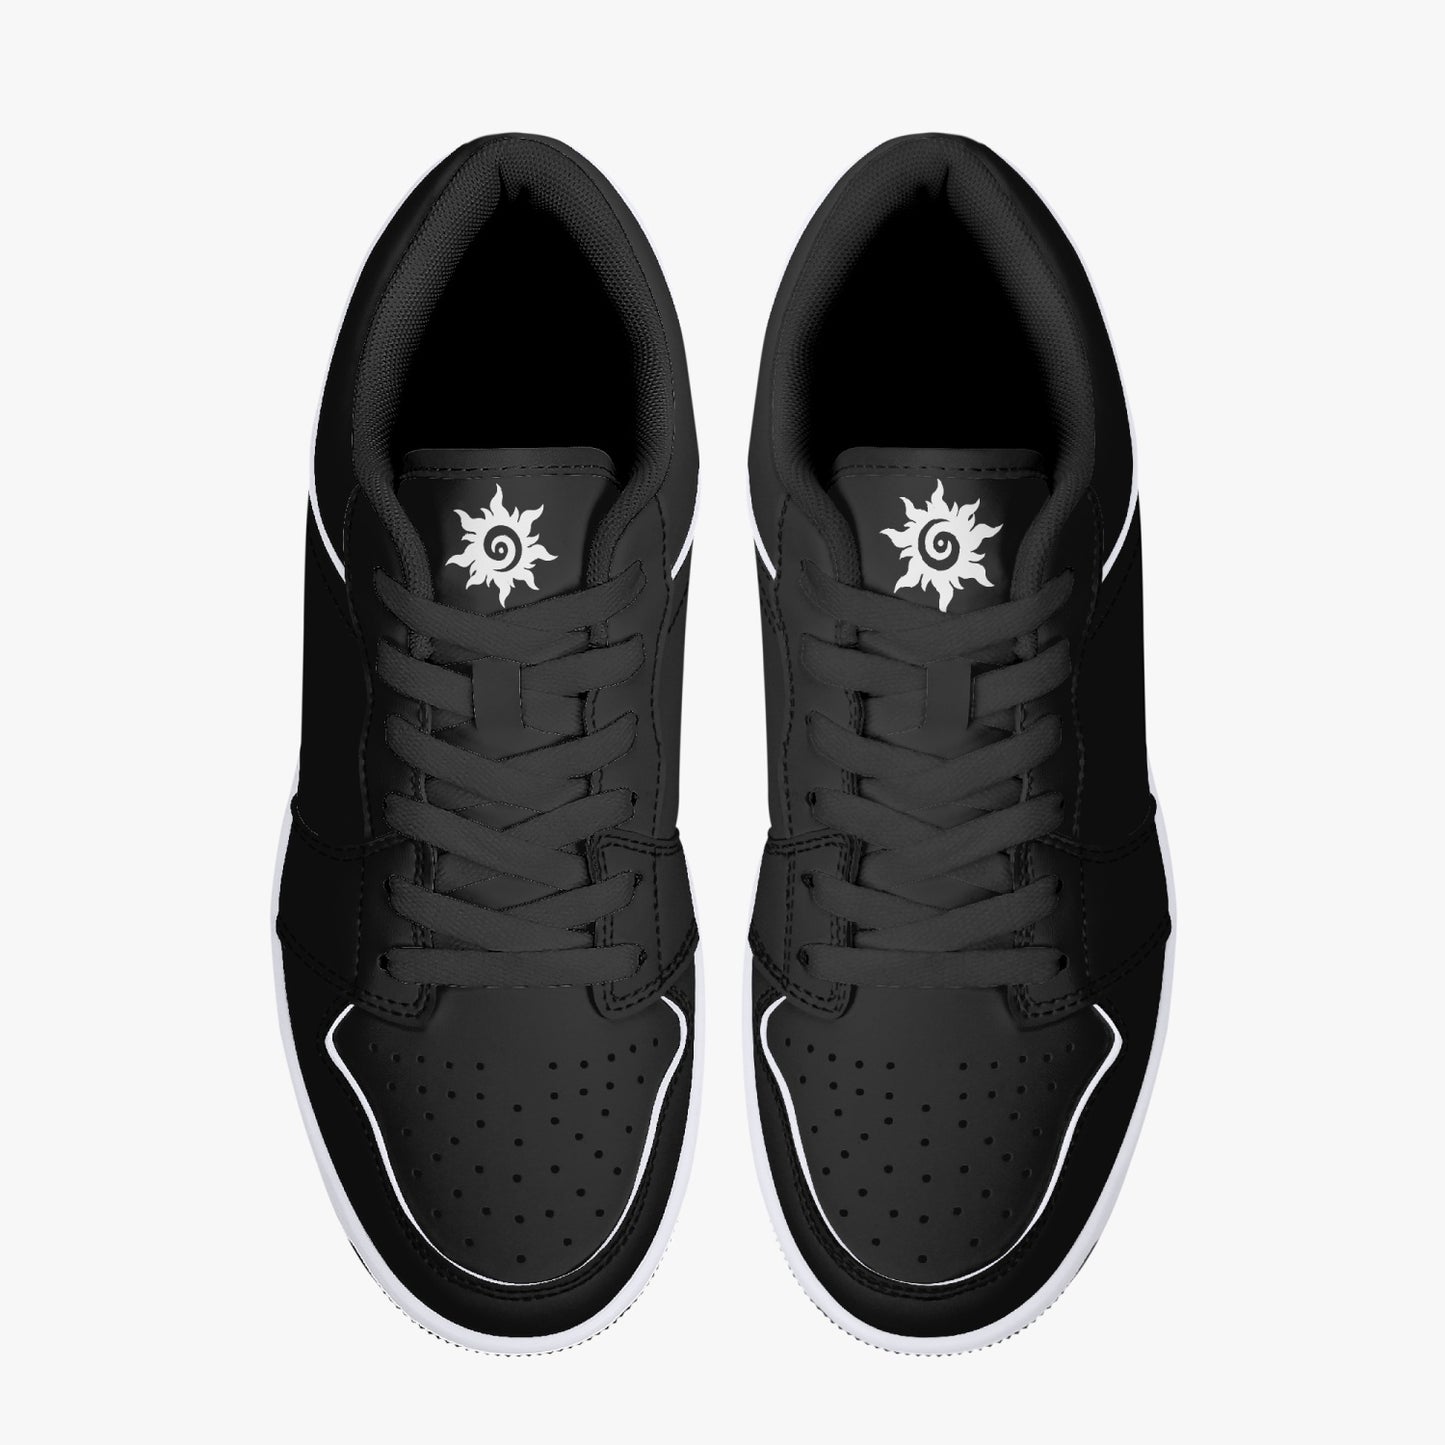 Unisex Low-Top Leather sneakers shoes - White/Black 1